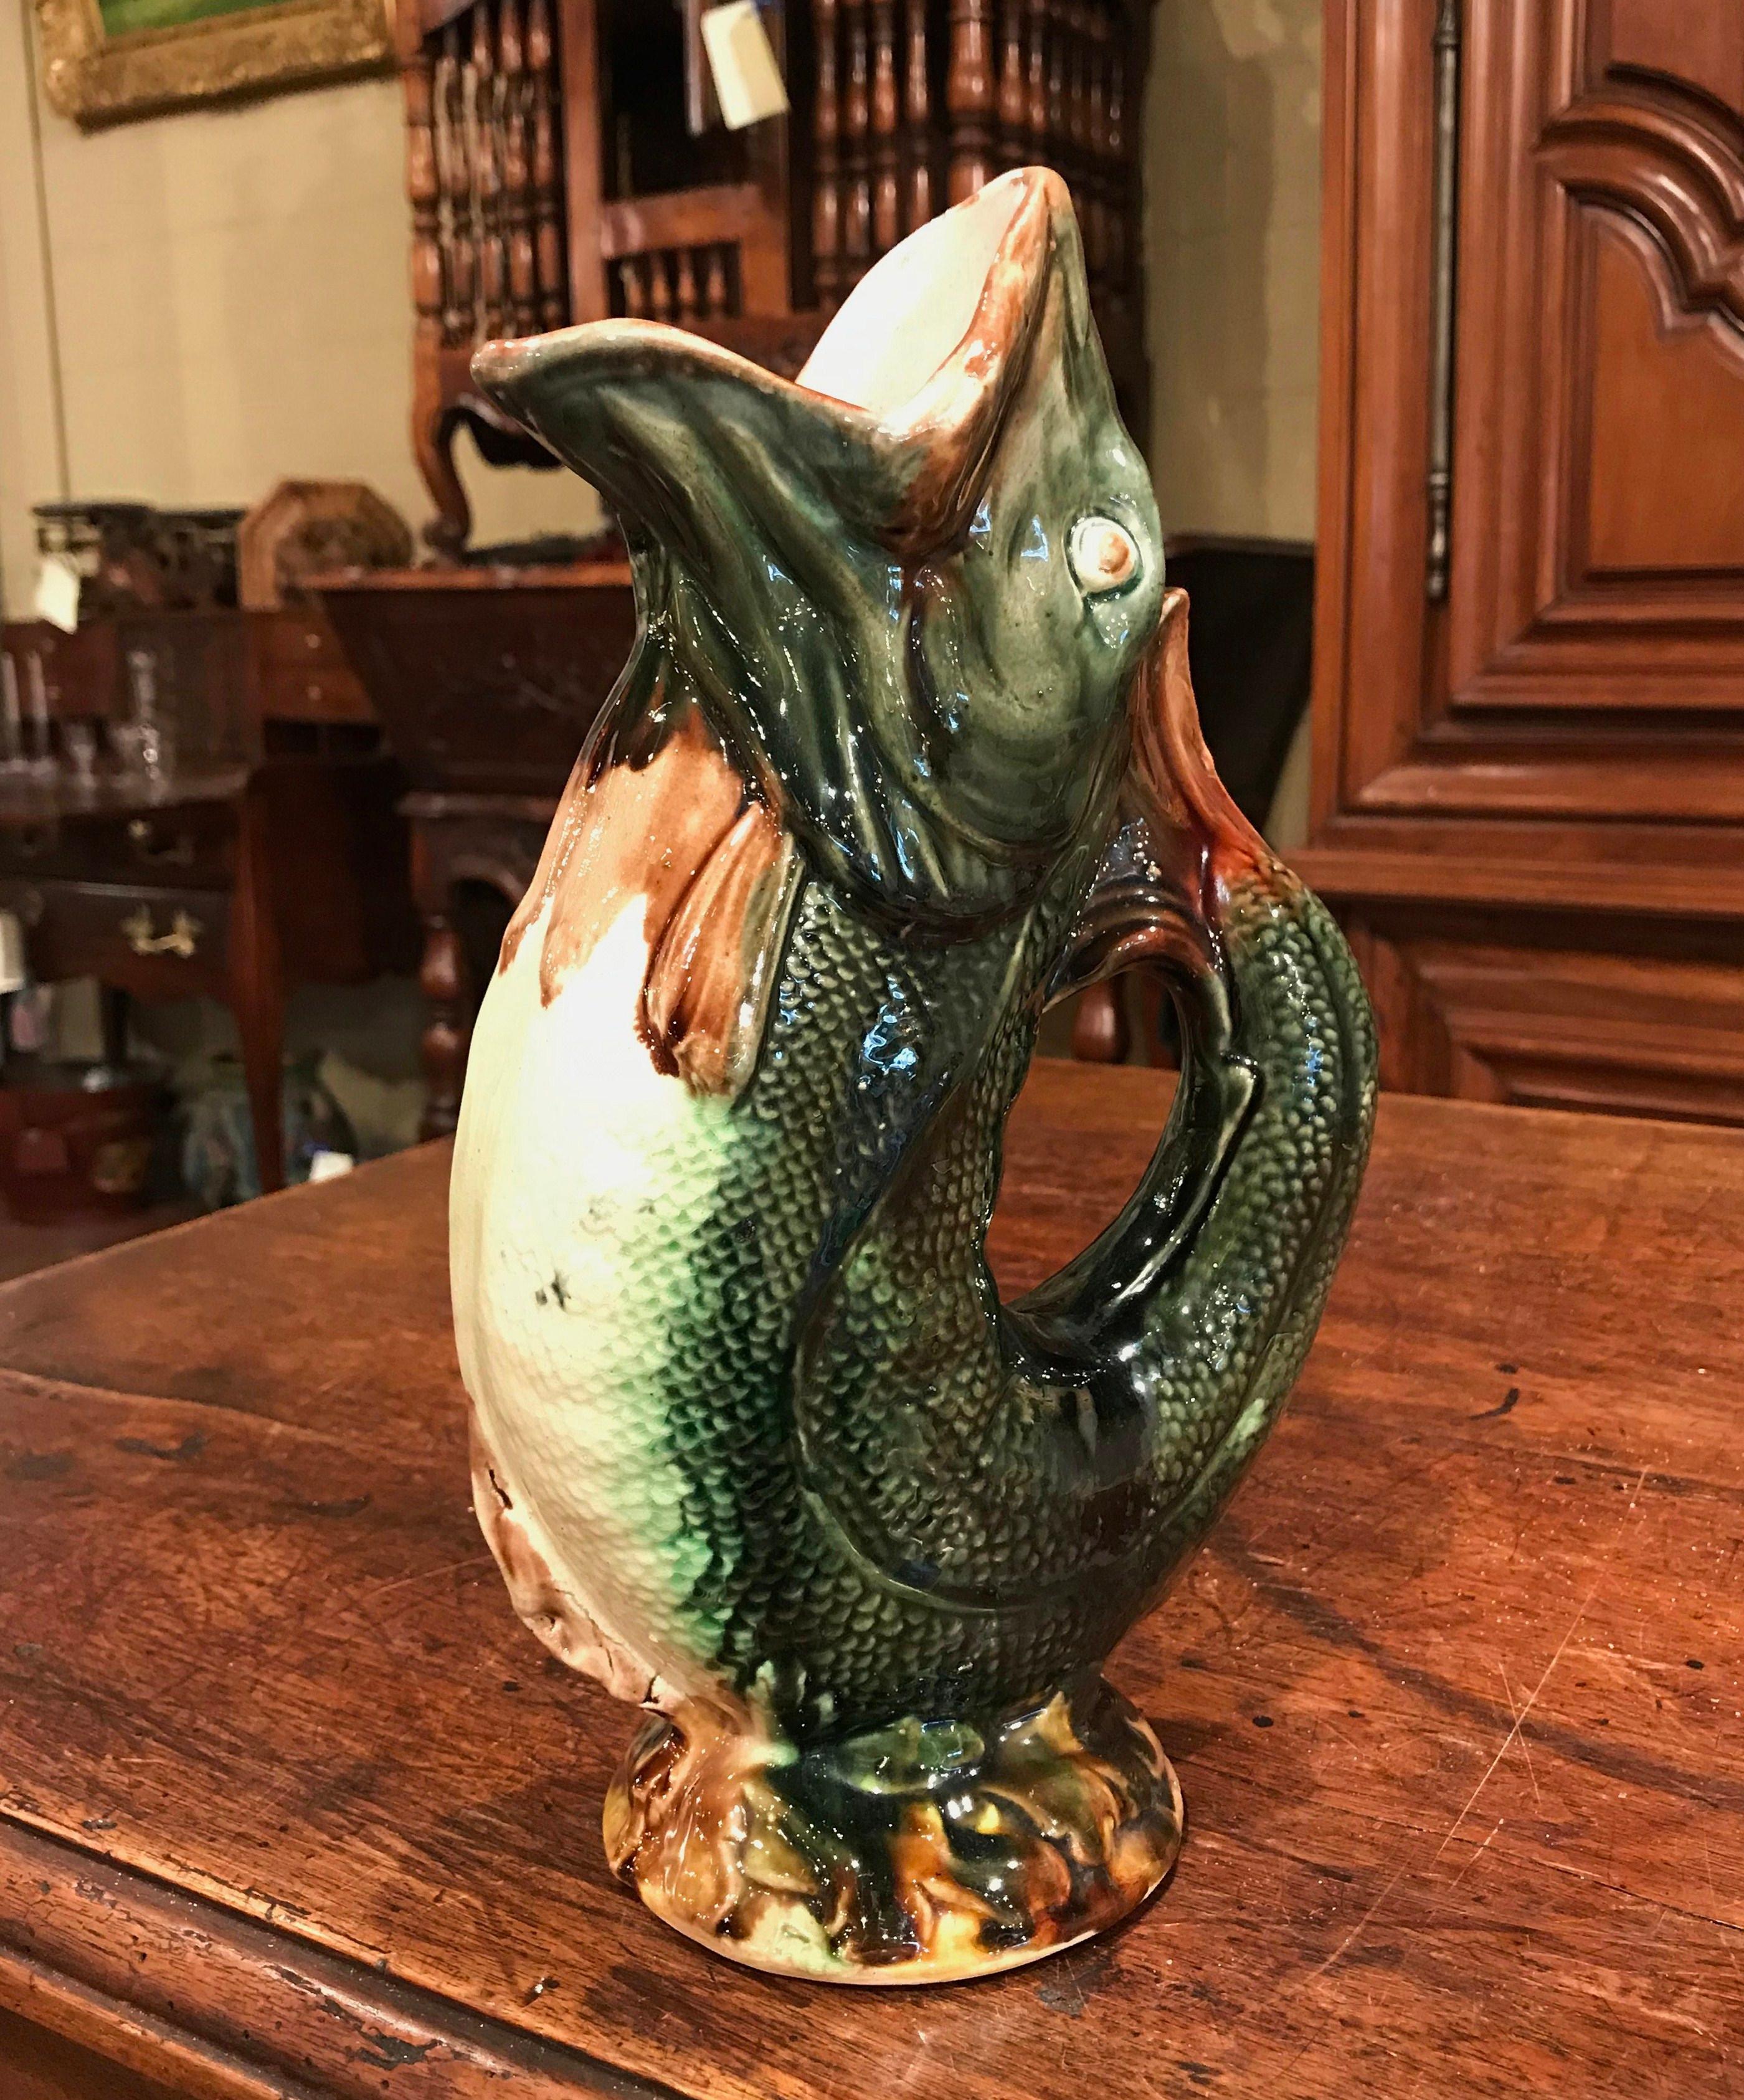 This lively pitcher would make an interesting addition to any porcelain collection. The colorful, antique water pitcher shows the beautiful artistry and painterly application of color true to Majolica ceramics. The porcelain vase was sculpted in